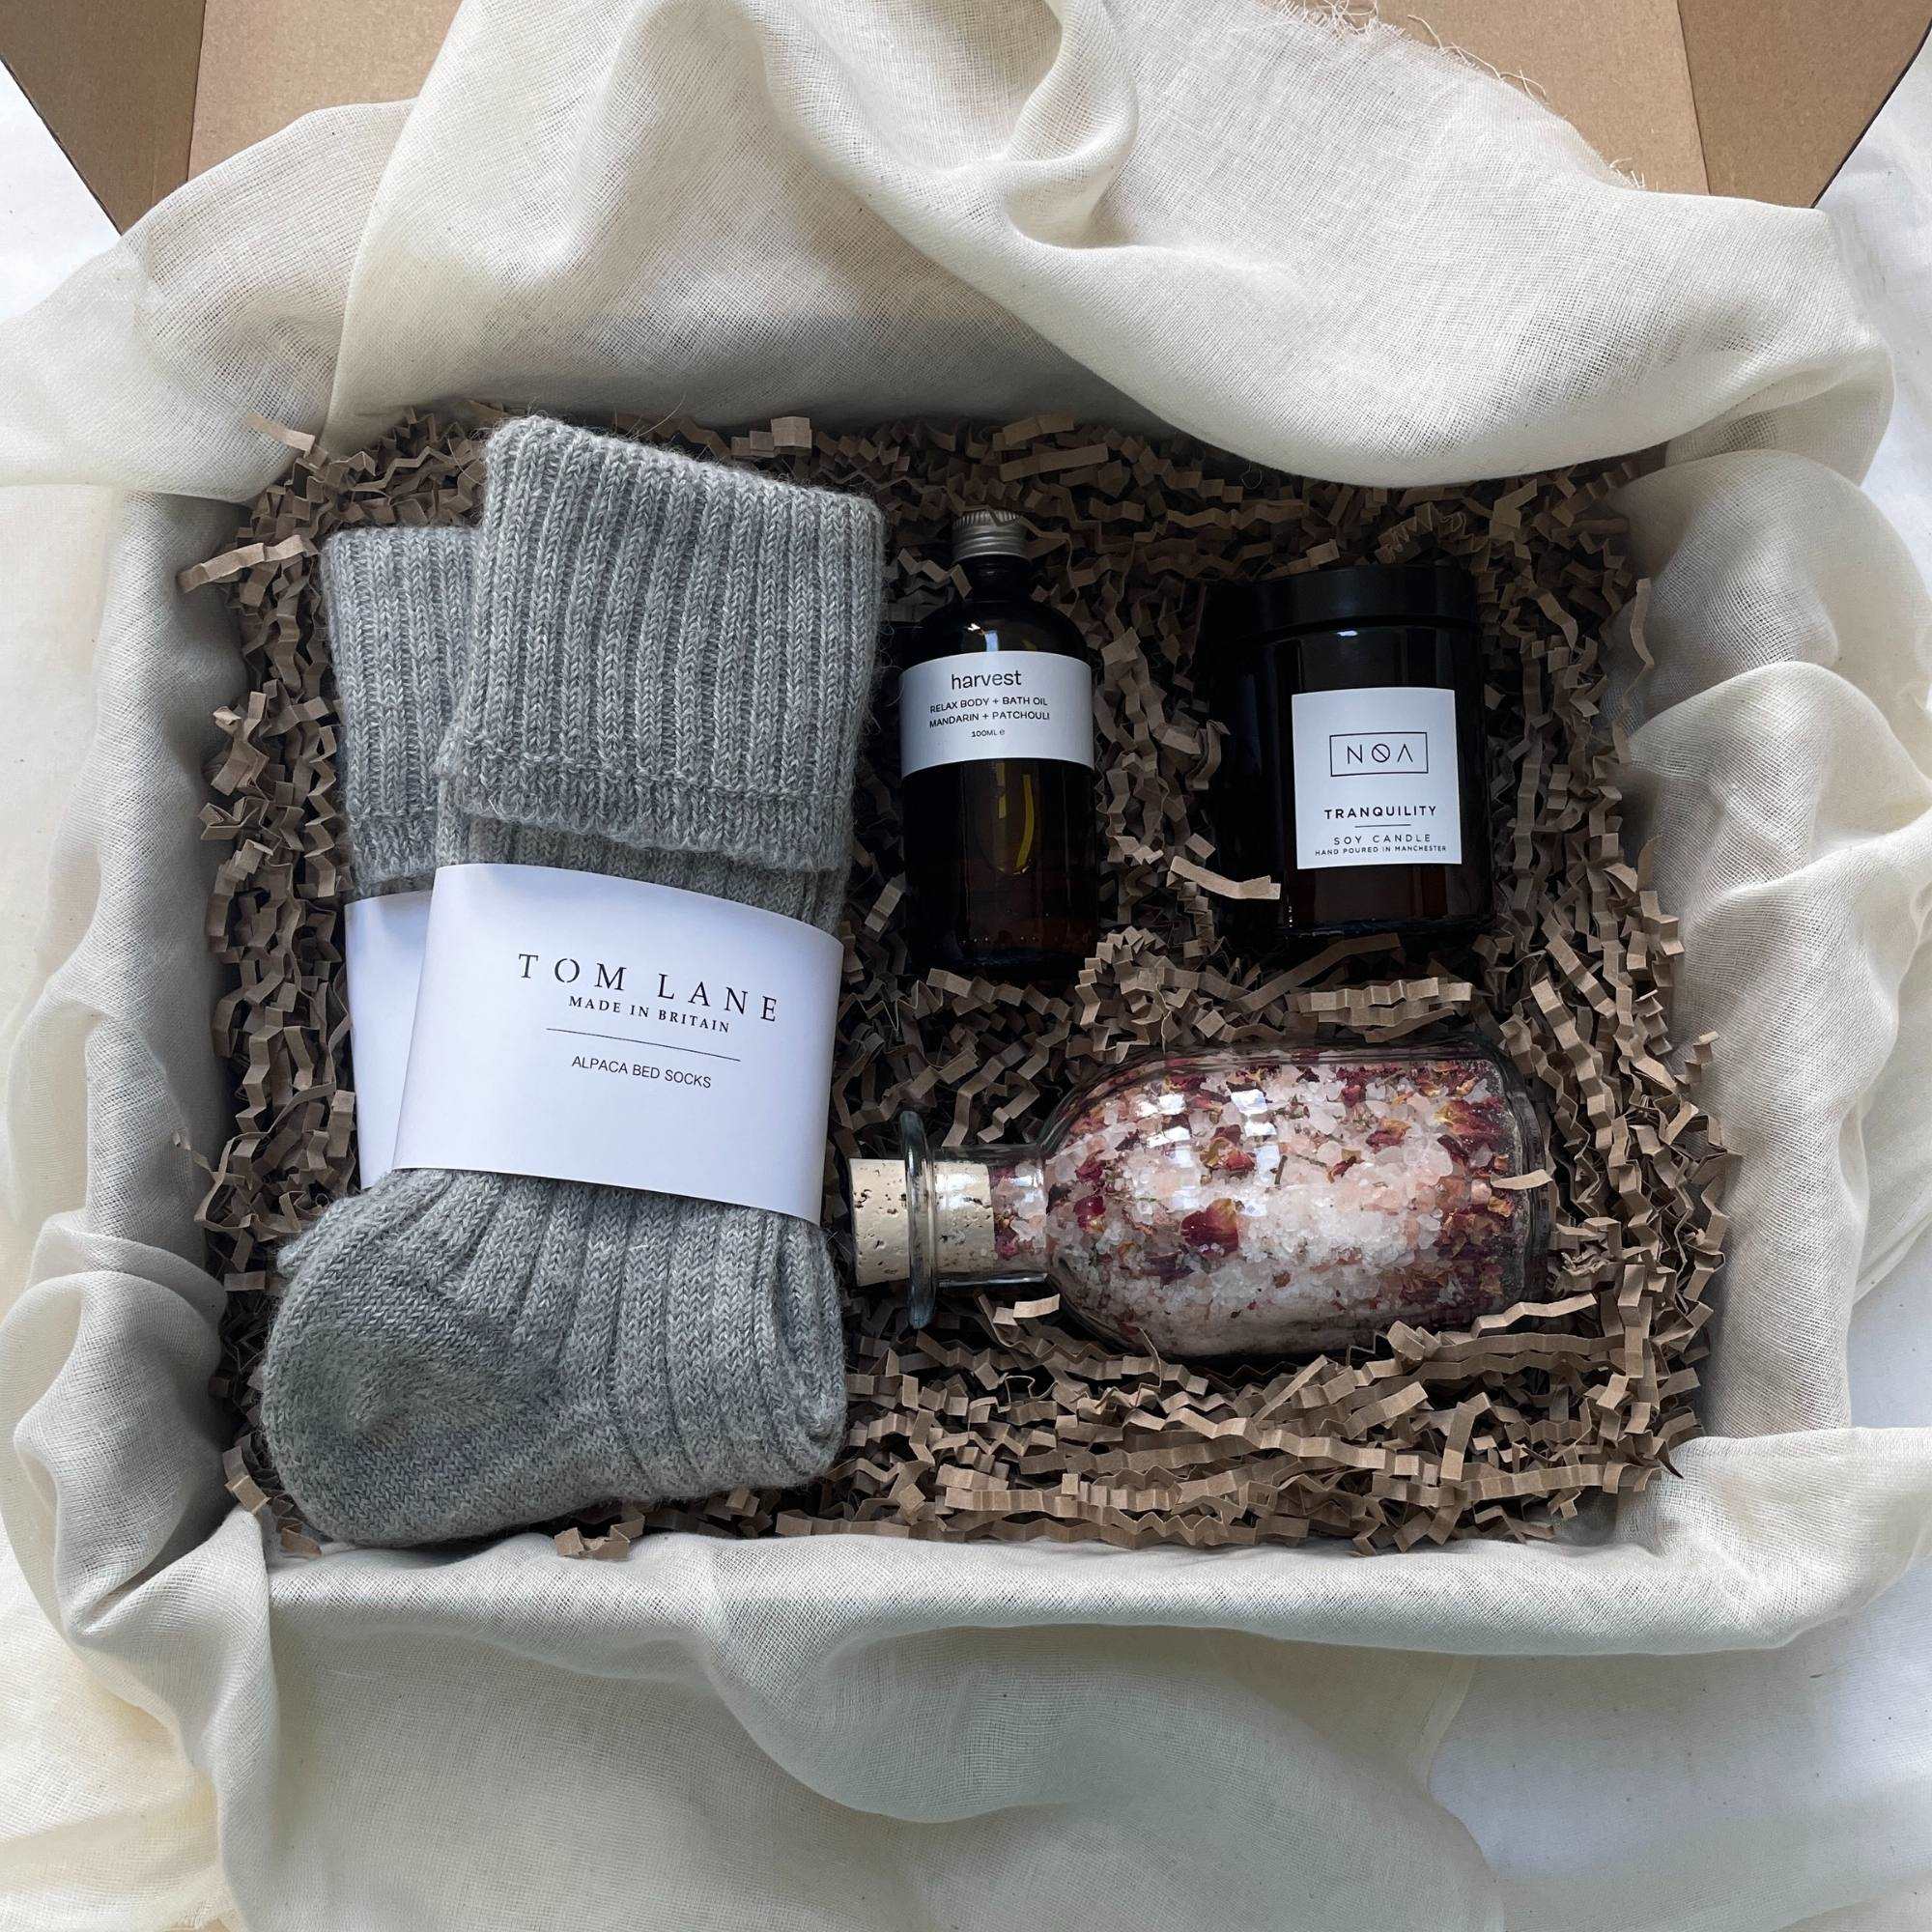 Photo of products inside a cardboard gift box. A clear glass bottle of rose bath salts, 2 pairs of grey alpaca bed socks, an amber glass bottle of body oil and amber glass candle sit on recycled brown paper stuffing on organic muslin fabric.